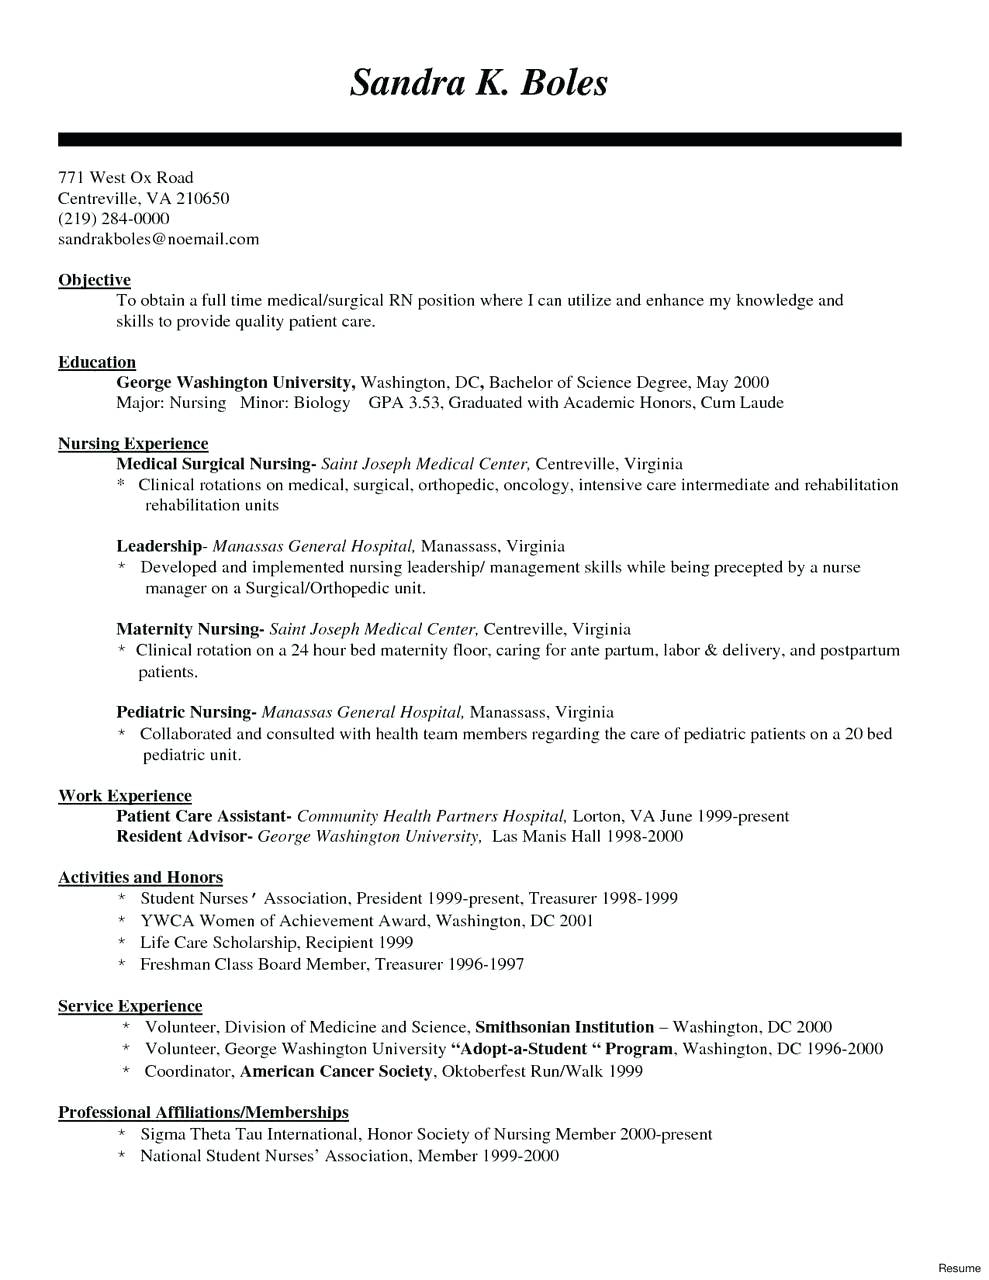 Nurse Cover Letter Sample Resume For Nurse Practitioner Student Awesome Gallery Pediatric Nurse Cover Letter Nursing Resume Examples With Clinical Of Sample Resume For Nurse Practitioner Student nurse cover letter|wikiresume.com